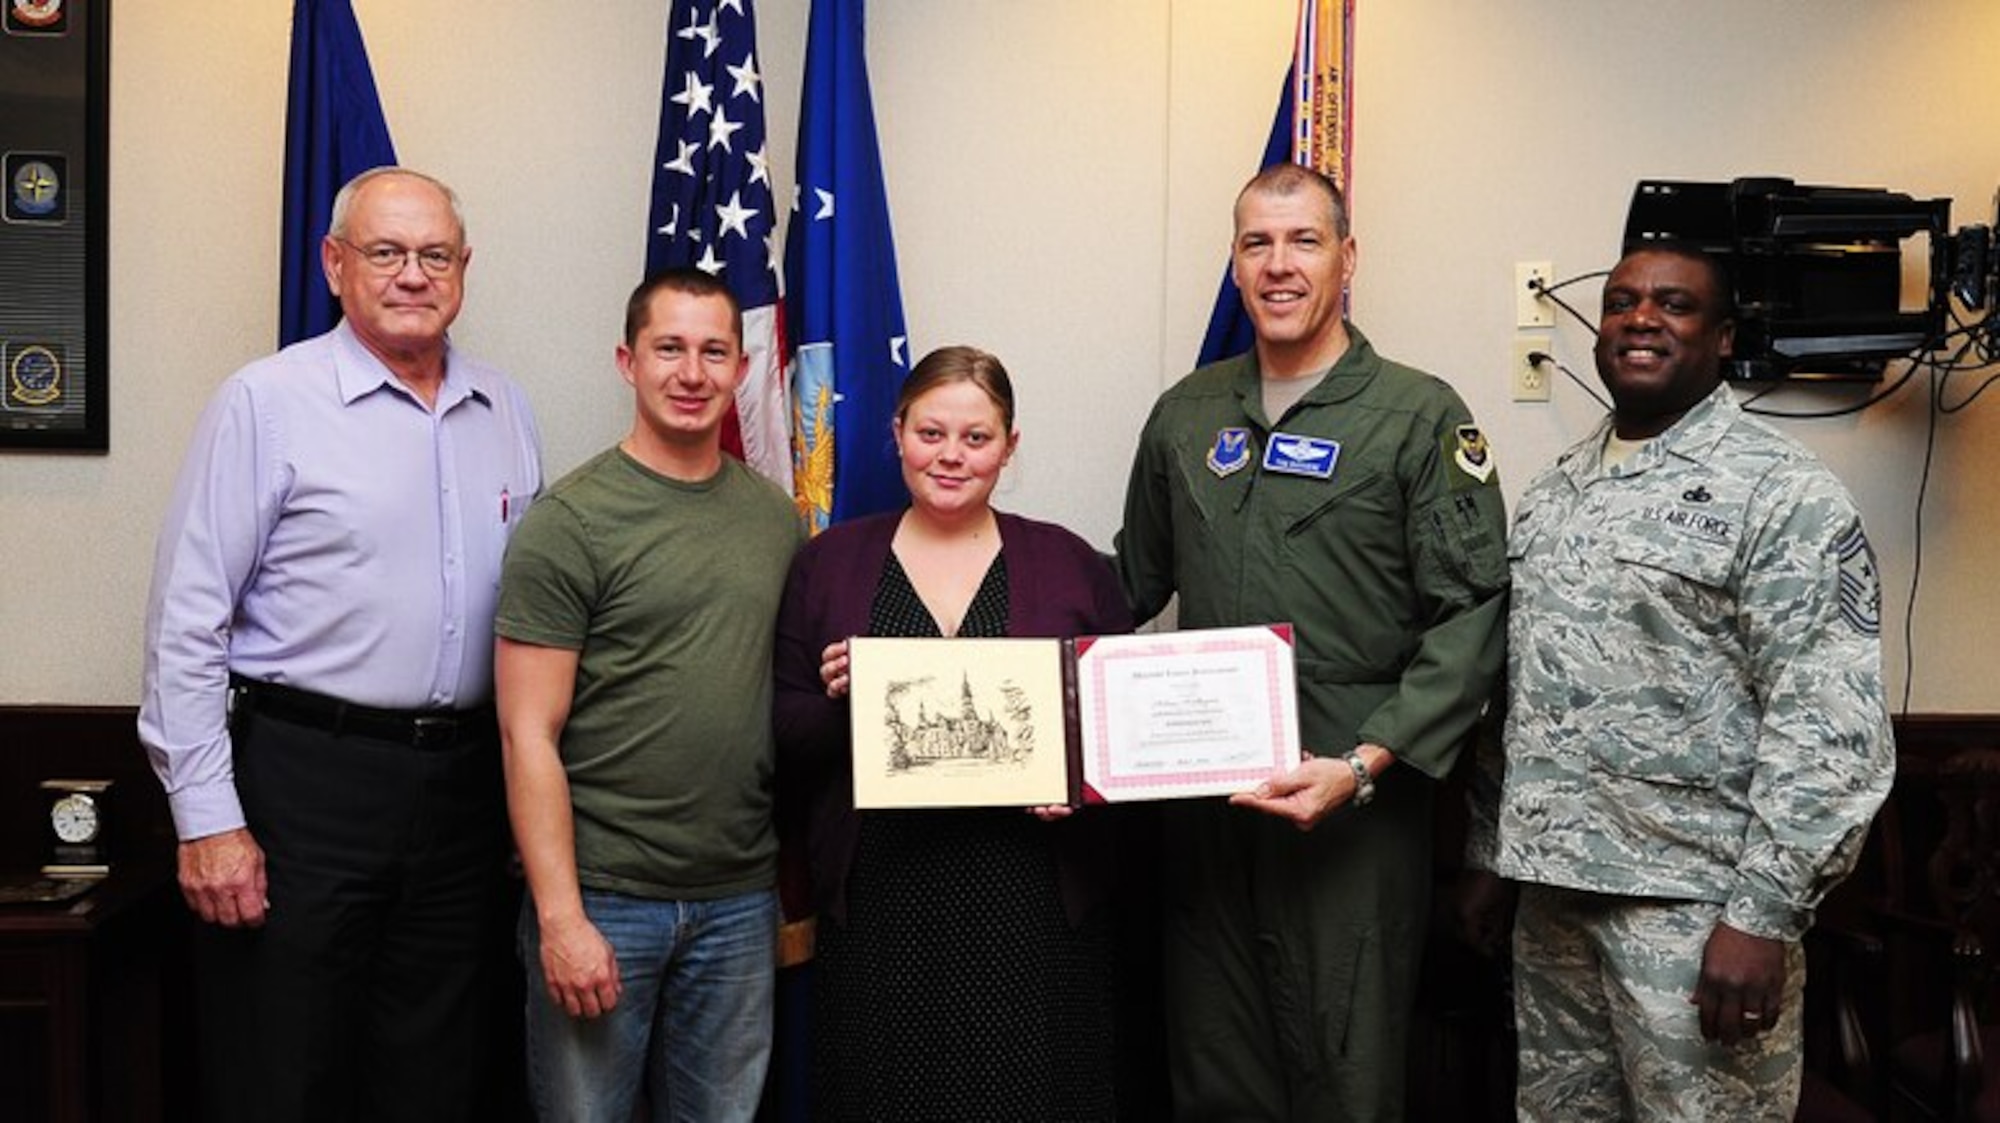 Michelle Slayton, center, a Park University student, accepts the Military Family Scholarship from Brig. Gen. Thomas A. Bussiere, 509th Bomb Wing commander, and Chief Master Sgt. Lee Barr, 509th BW command chief, Nov. 13, 2013, at Whiteman Air Force Base, Mo. Also pictured are Dale Buckingham, Park University campus center director and Michelle’s husband, Christopher, from the 509th Maintenance Squadron. (U.S. Air Force photo by Staff Sgt. Brigitte N. Brantley/Released)